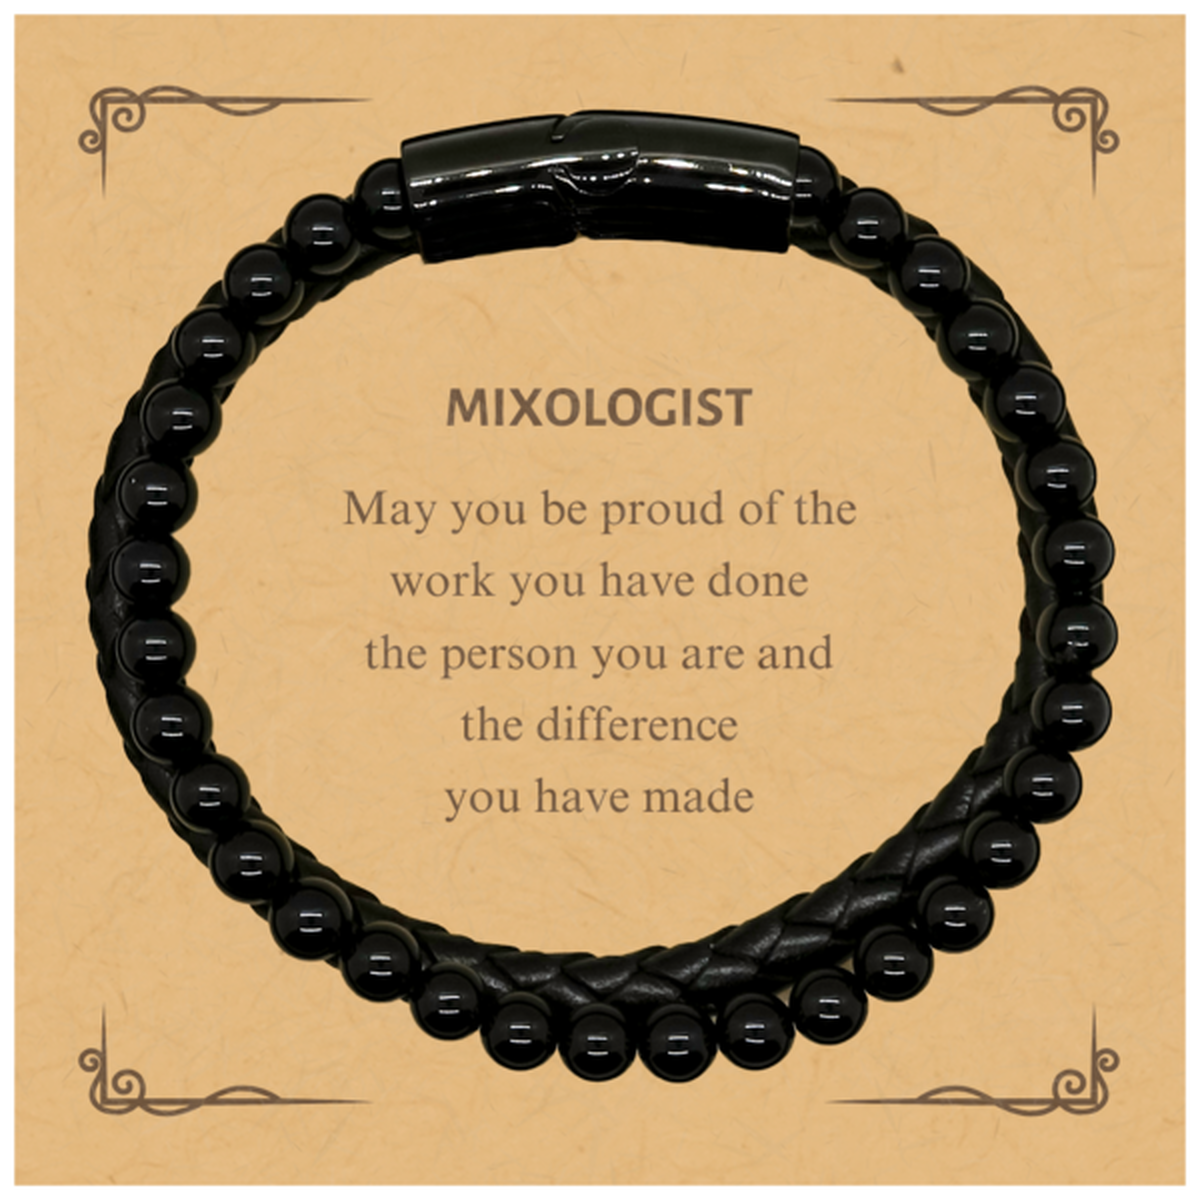 Mixologist May you be proud of the work you have done, Retirement Mixologist Stone Leather Bracelets for Colleague Appreciation Gifts Amazing for Mixologist